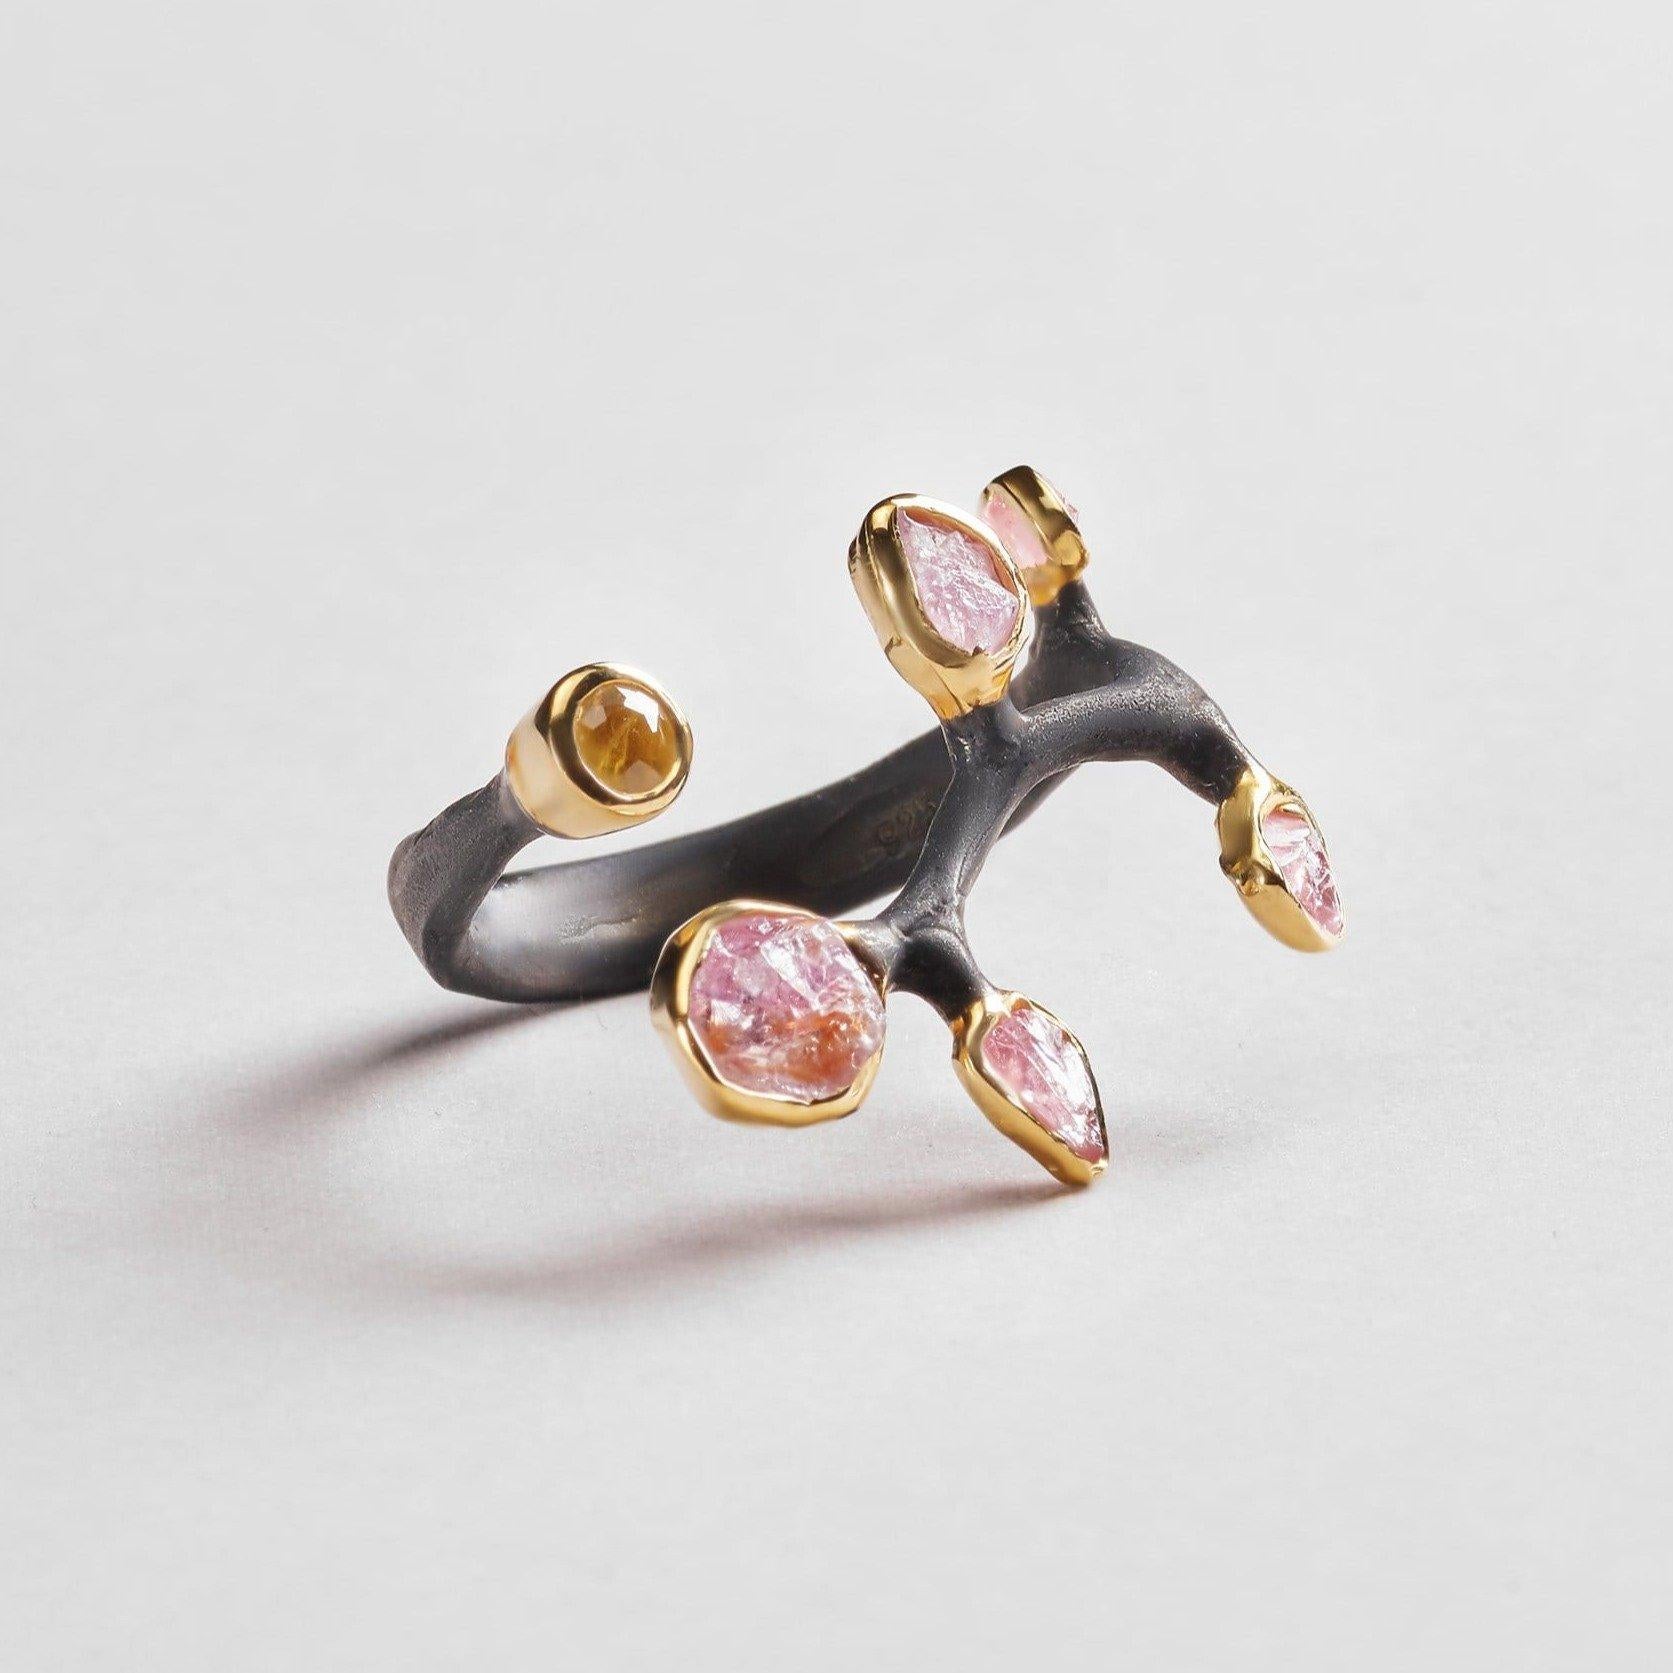 A beautiful black anthracite ring loops round in a natural sinuous curve and is dotted with sparkling yellow sapphires and rough spinel gemstones. Each has echoes of natural organic shape and form that is celebrated in true beauty.
